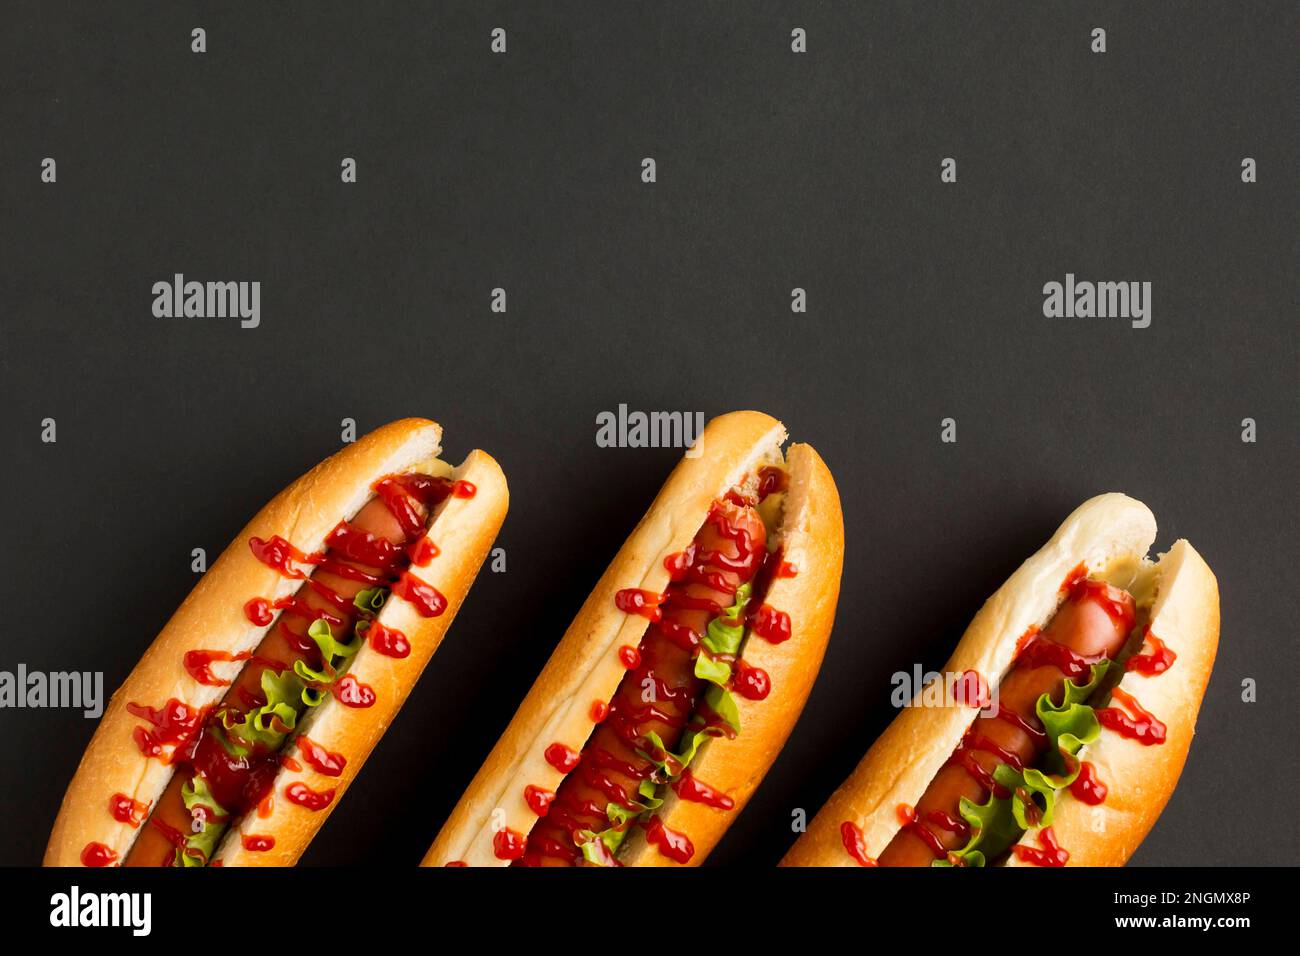 top view delicious hot dogs Stock Photo